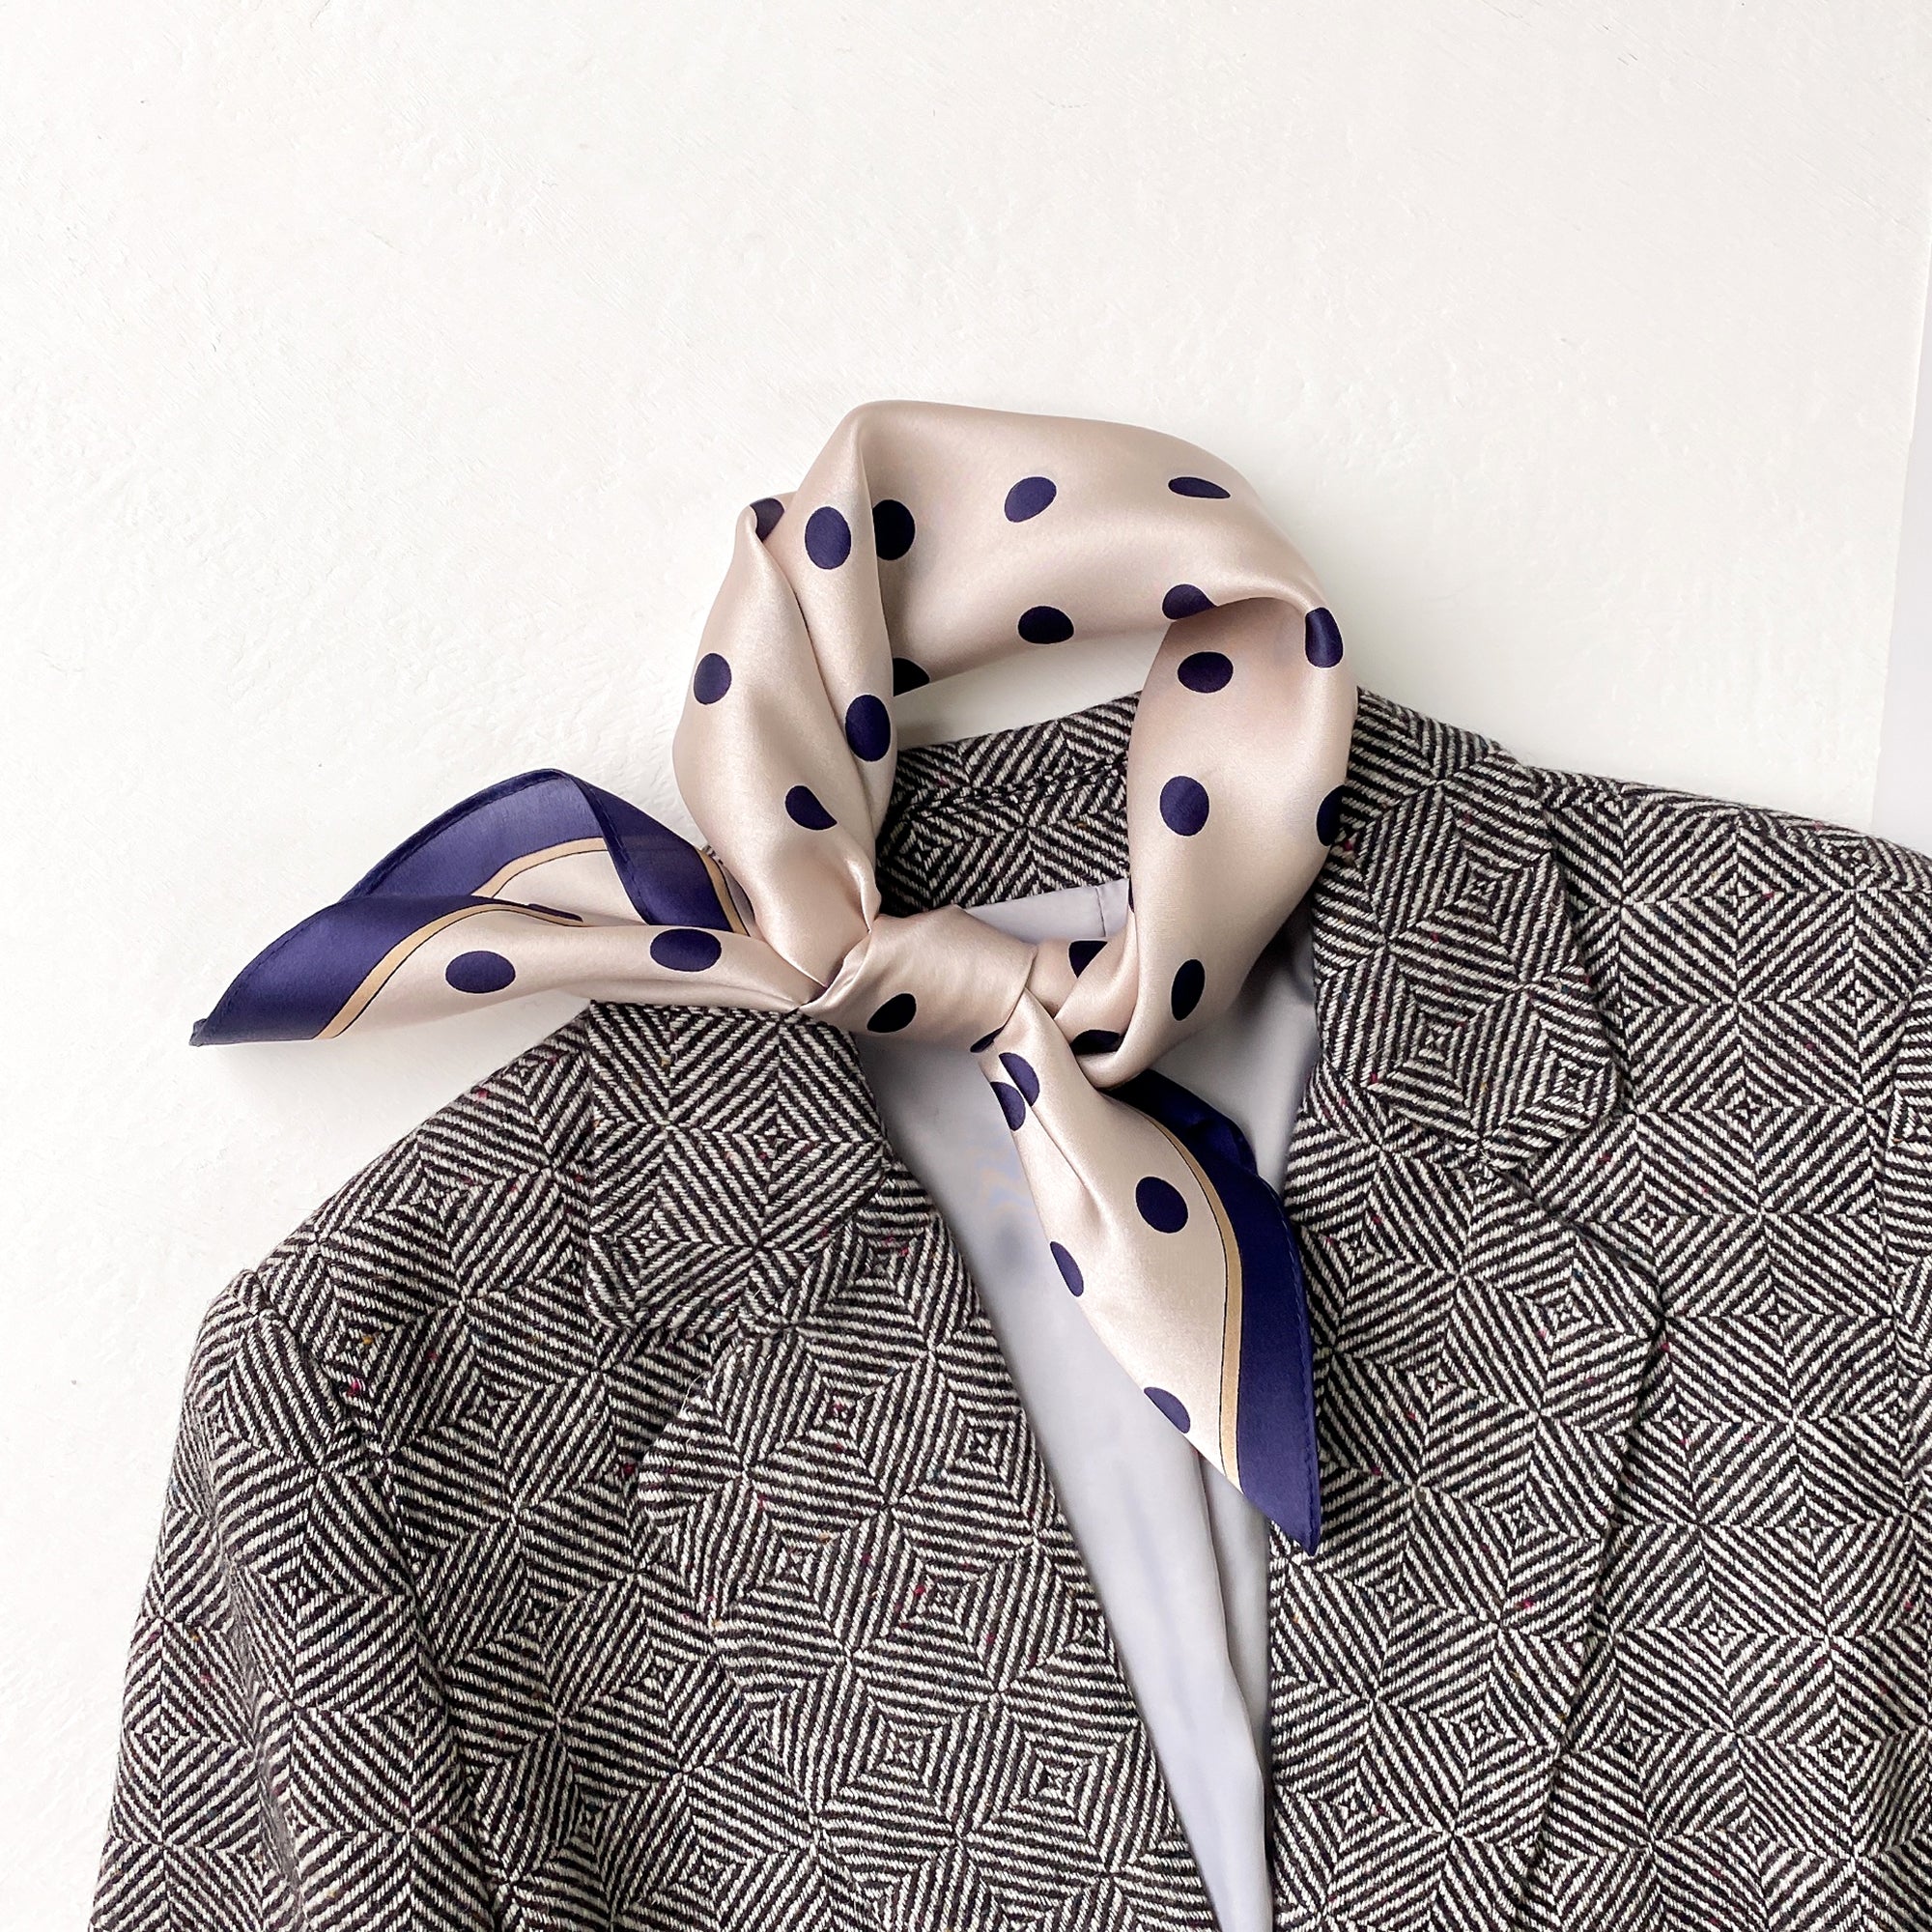 a champagne small silk scarf/neckerchief with polka dot pattern